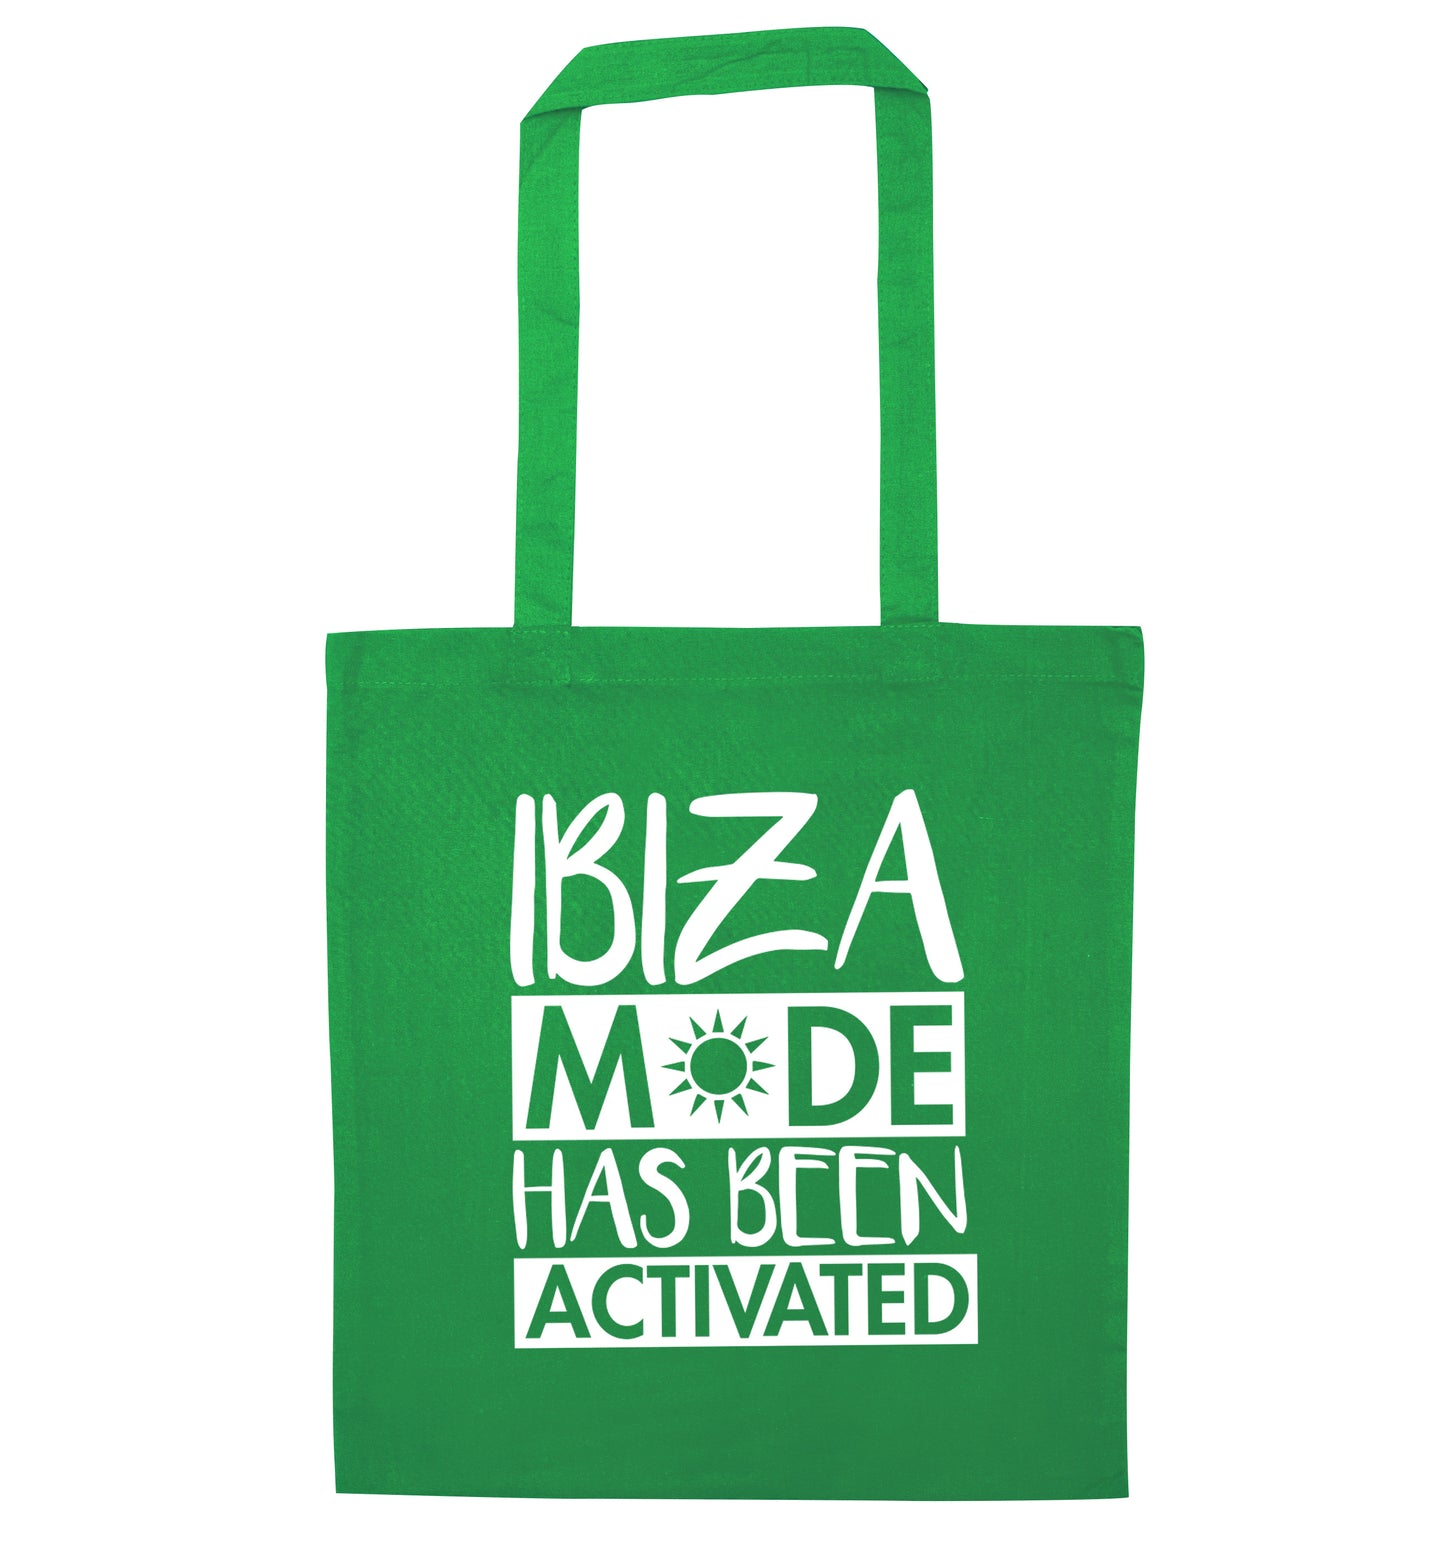 Ibiza mode has been activated green tote bag